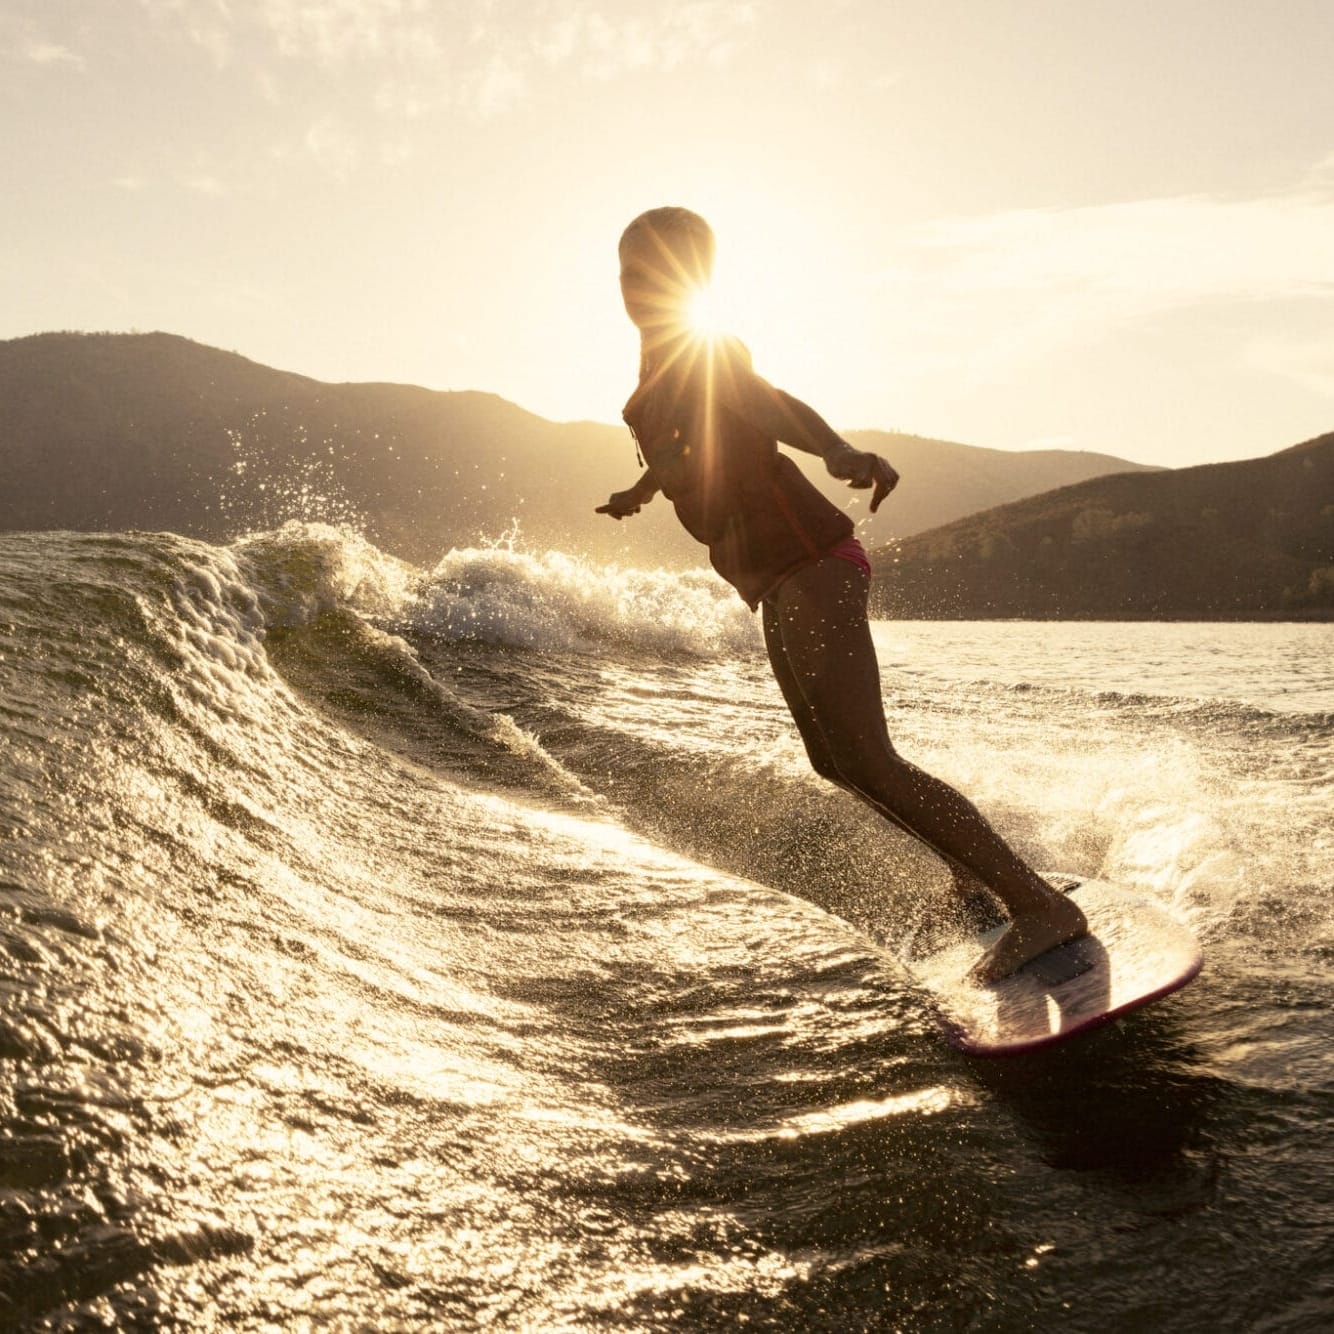 Kenzie Hickey, a woman, effortlessly rides a wave on her surfboard.